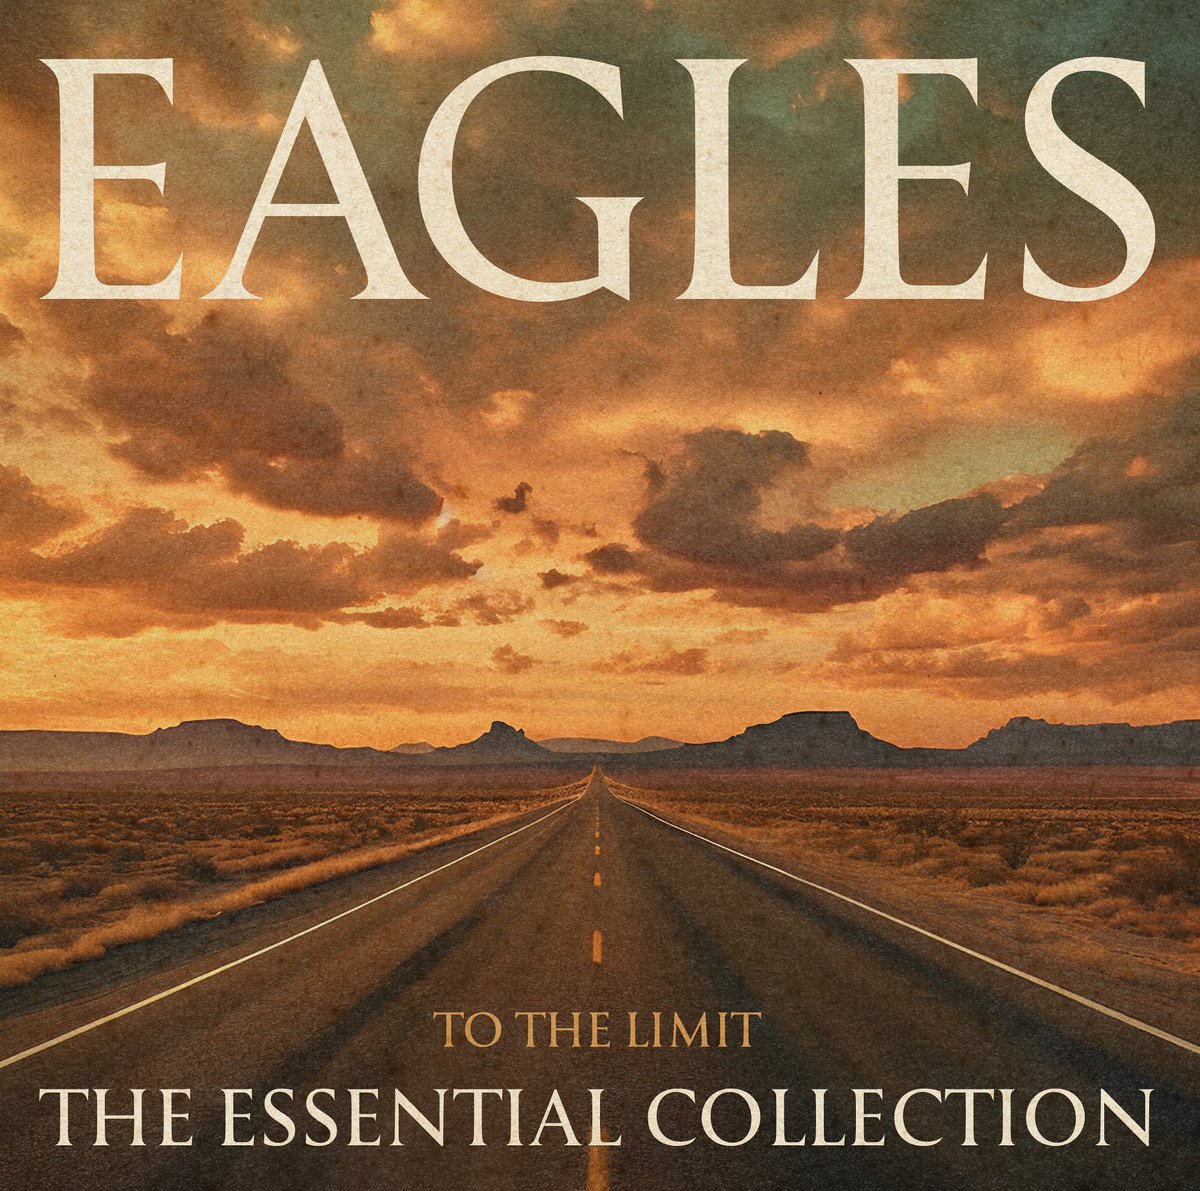 The EAGLES-TO THE LIMIT-THE ESSENTIAL COLLECTION is out now! This Career-Spanning Set Covers 51 Studio And Live Recordings Released Between 1972 And 2020, With 3-CD, 6-LP, And Digital Versions available Check it out over at rhino.com!